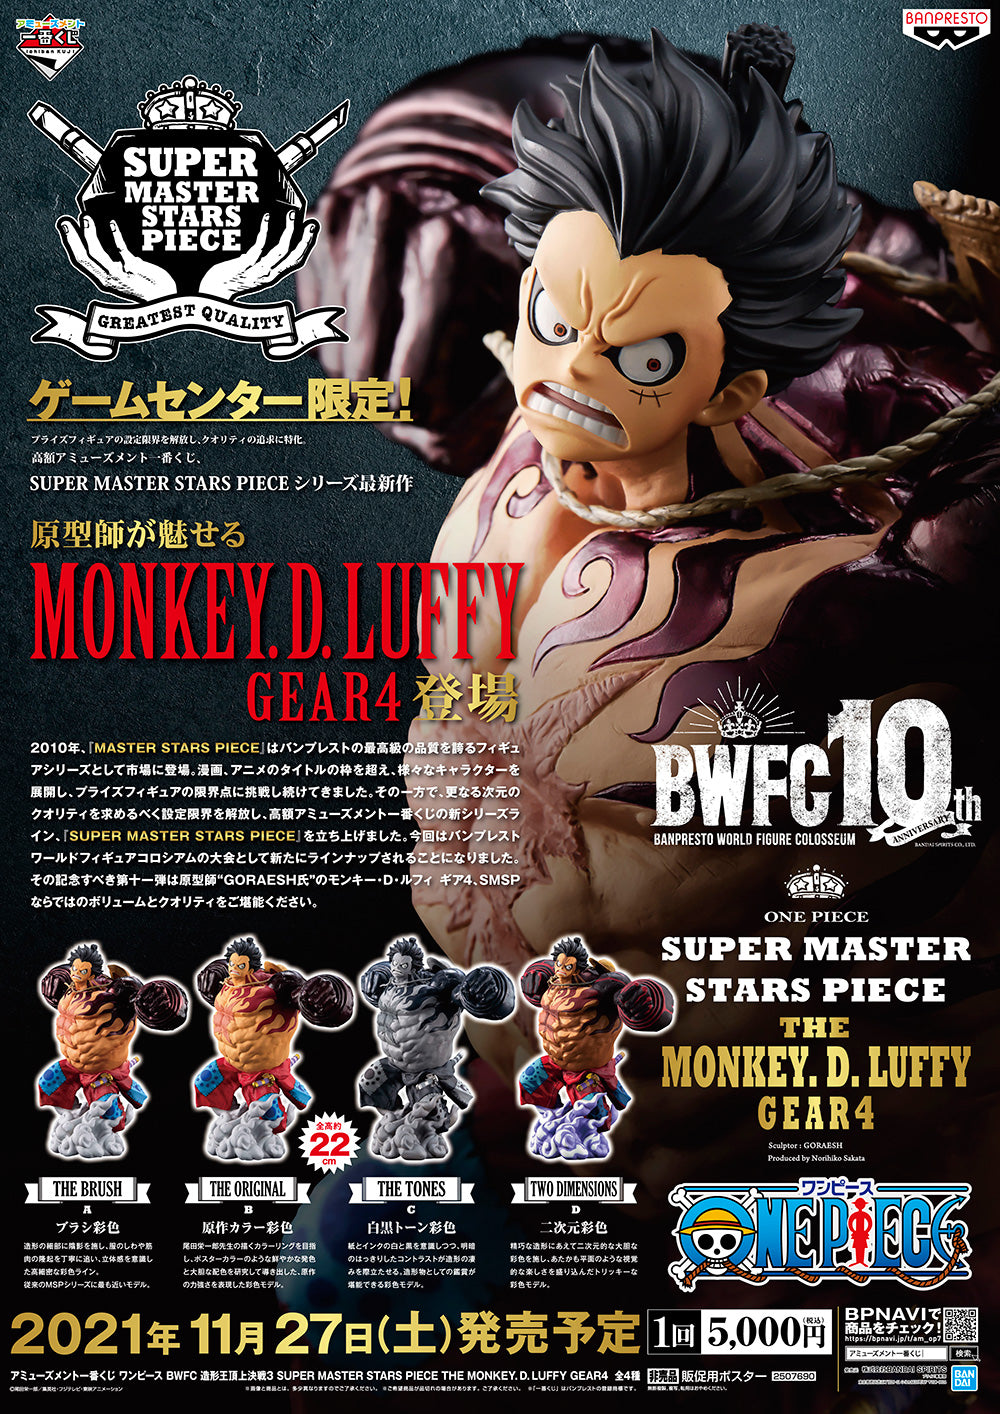 BANPRESTO ONE PIECE BWFC SUPER MASTERS STAR PIECE THE MONKEY.D.LUFFY GEAR4 D. THE TWO DIMENSIONS